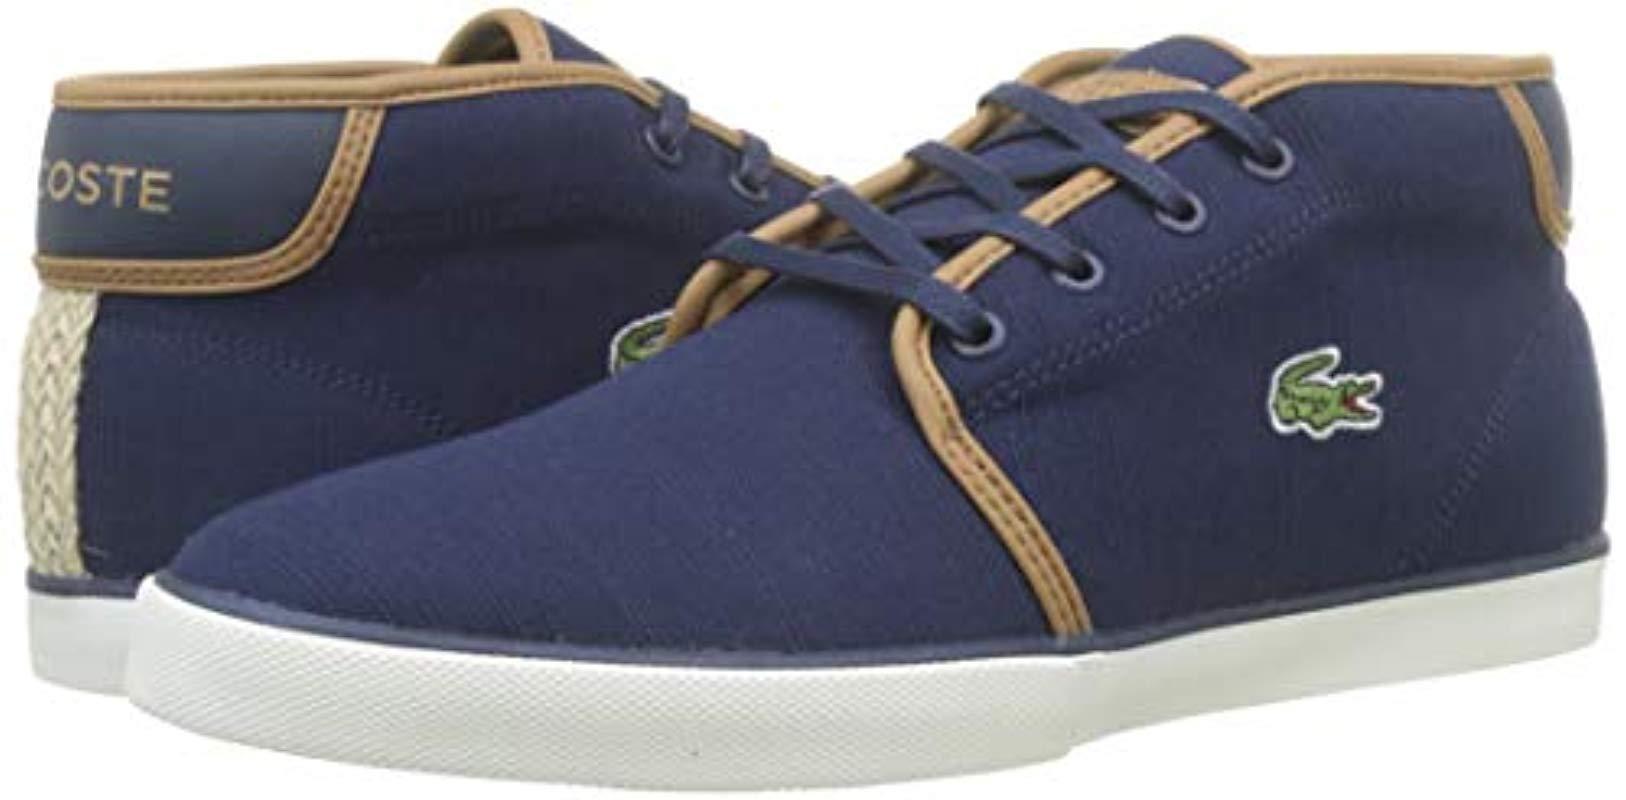 lacoste ampthill 119